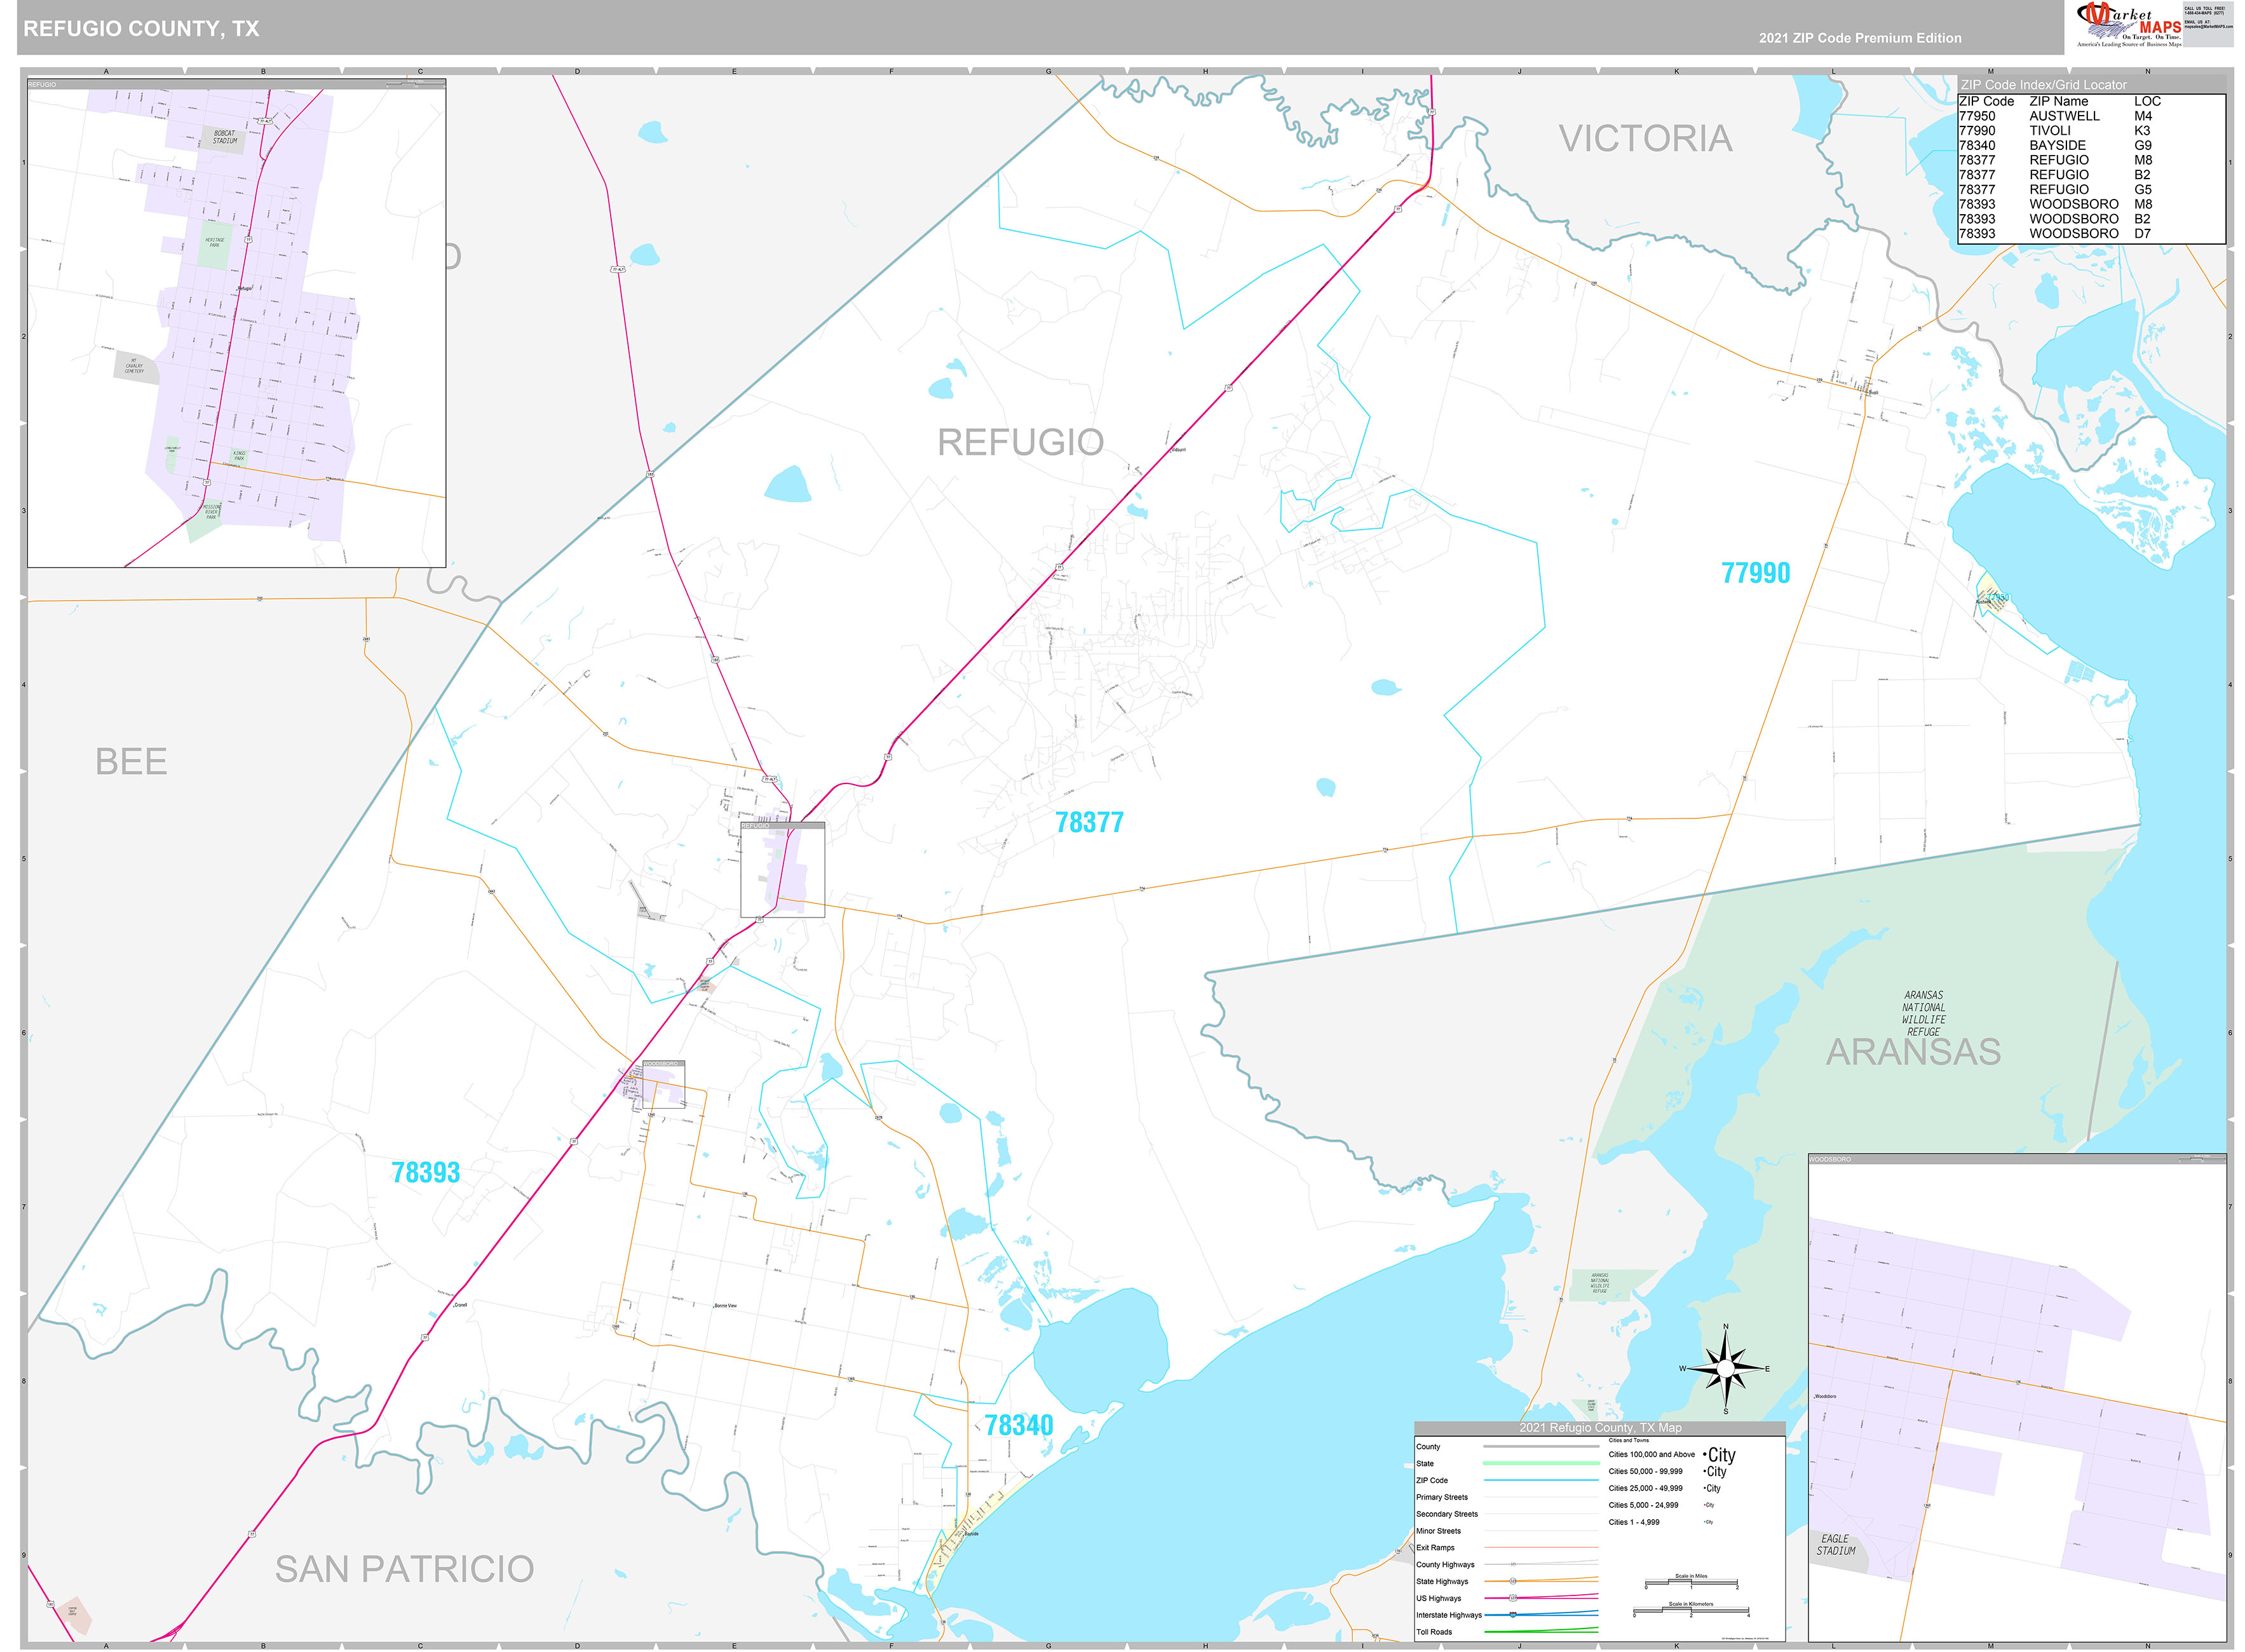 Refugio County, TX Wall Map Premium Style by MarketMAPS - MapSales.com